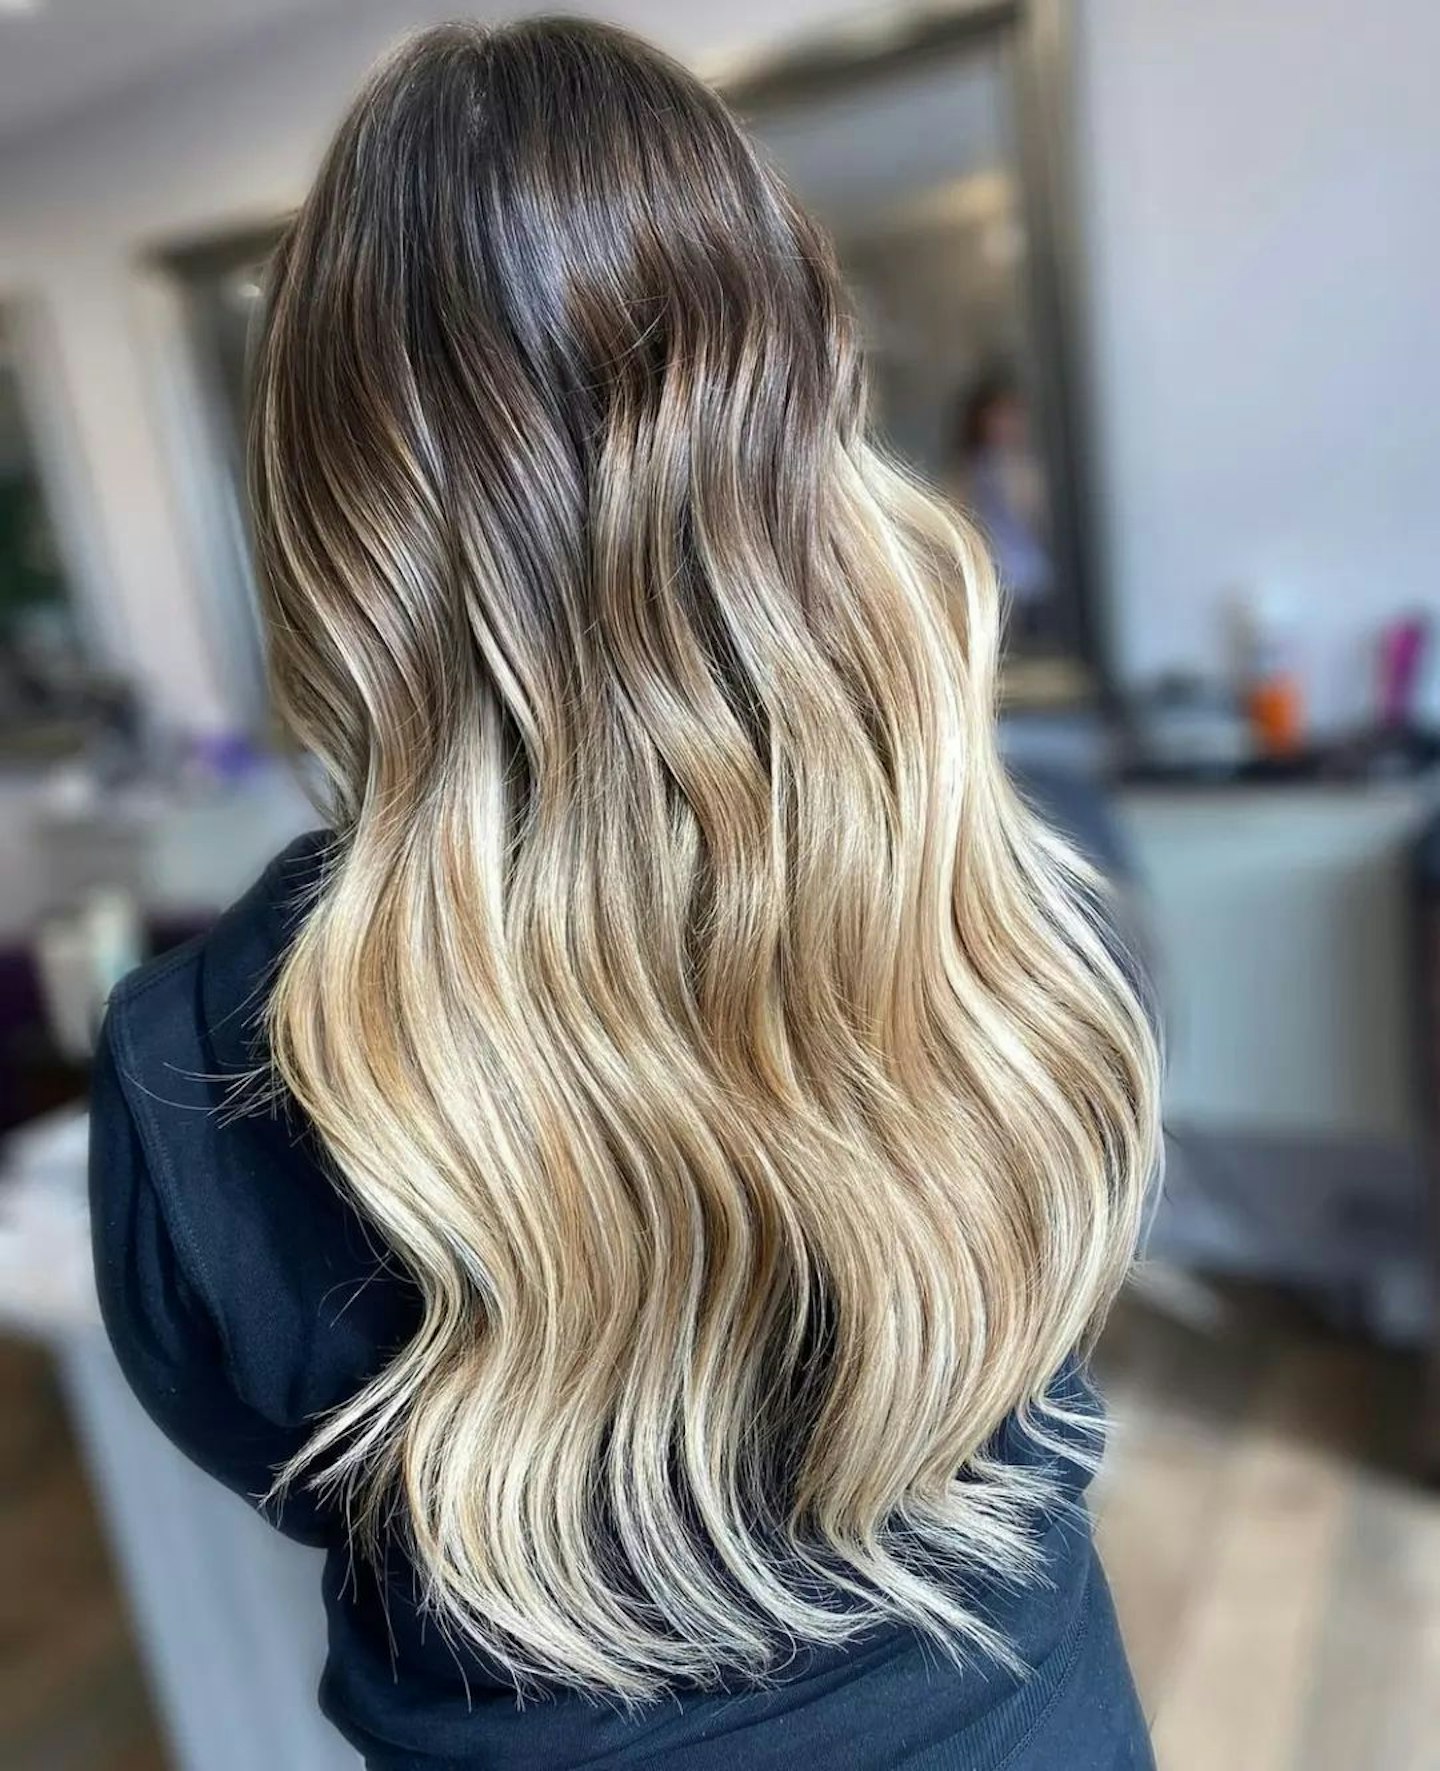 9 Types of Highlights to Inspire Your Next Hair Transformation